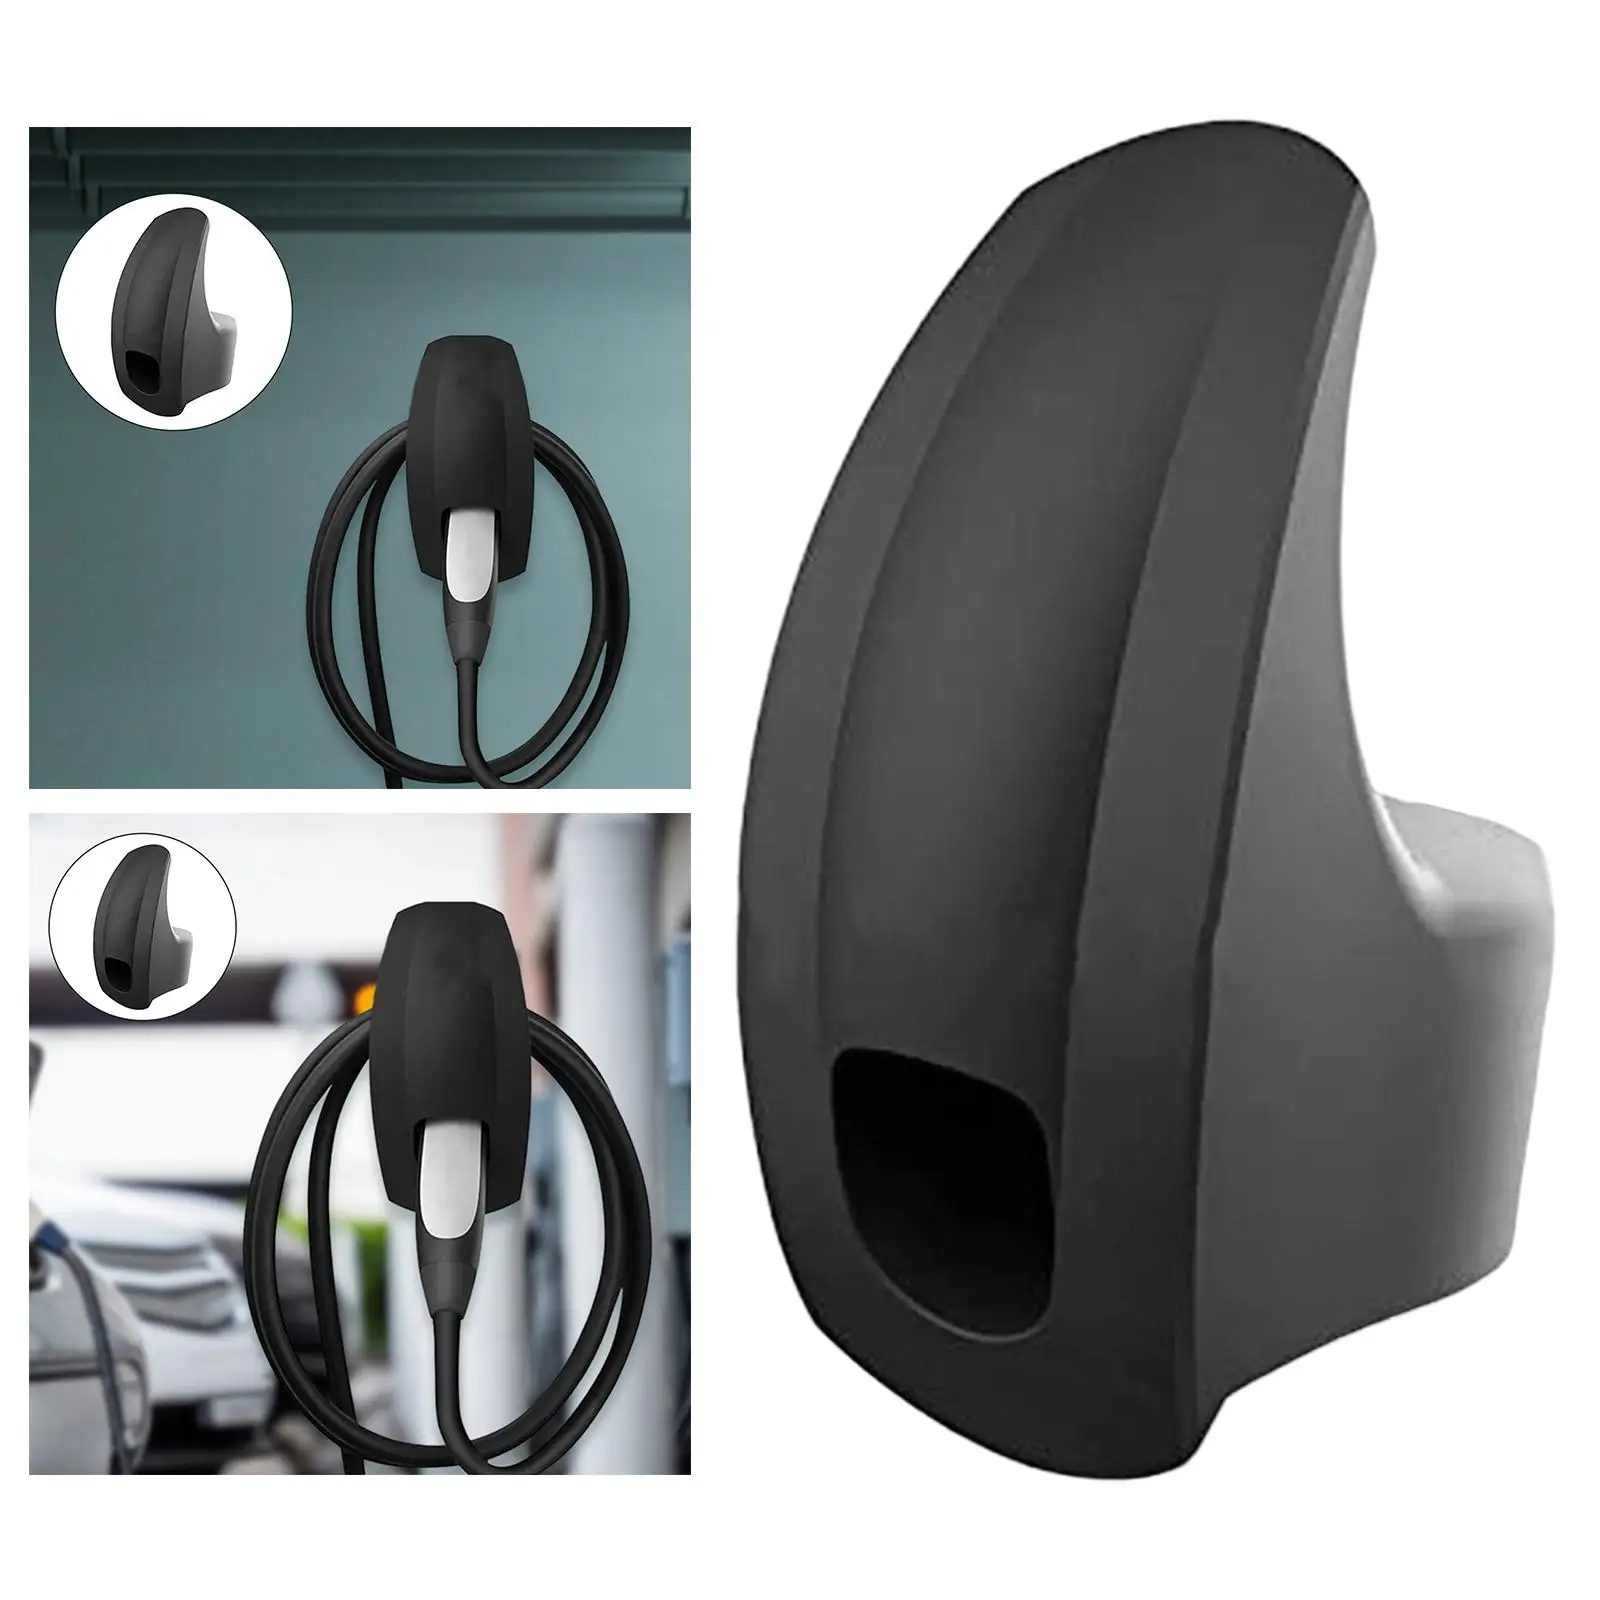 Charger Wall Holder Mount Accessories Durable Charging Cable Holder for Tesla Model 3 S x Y Accessories Tesla Model 3 S x Y